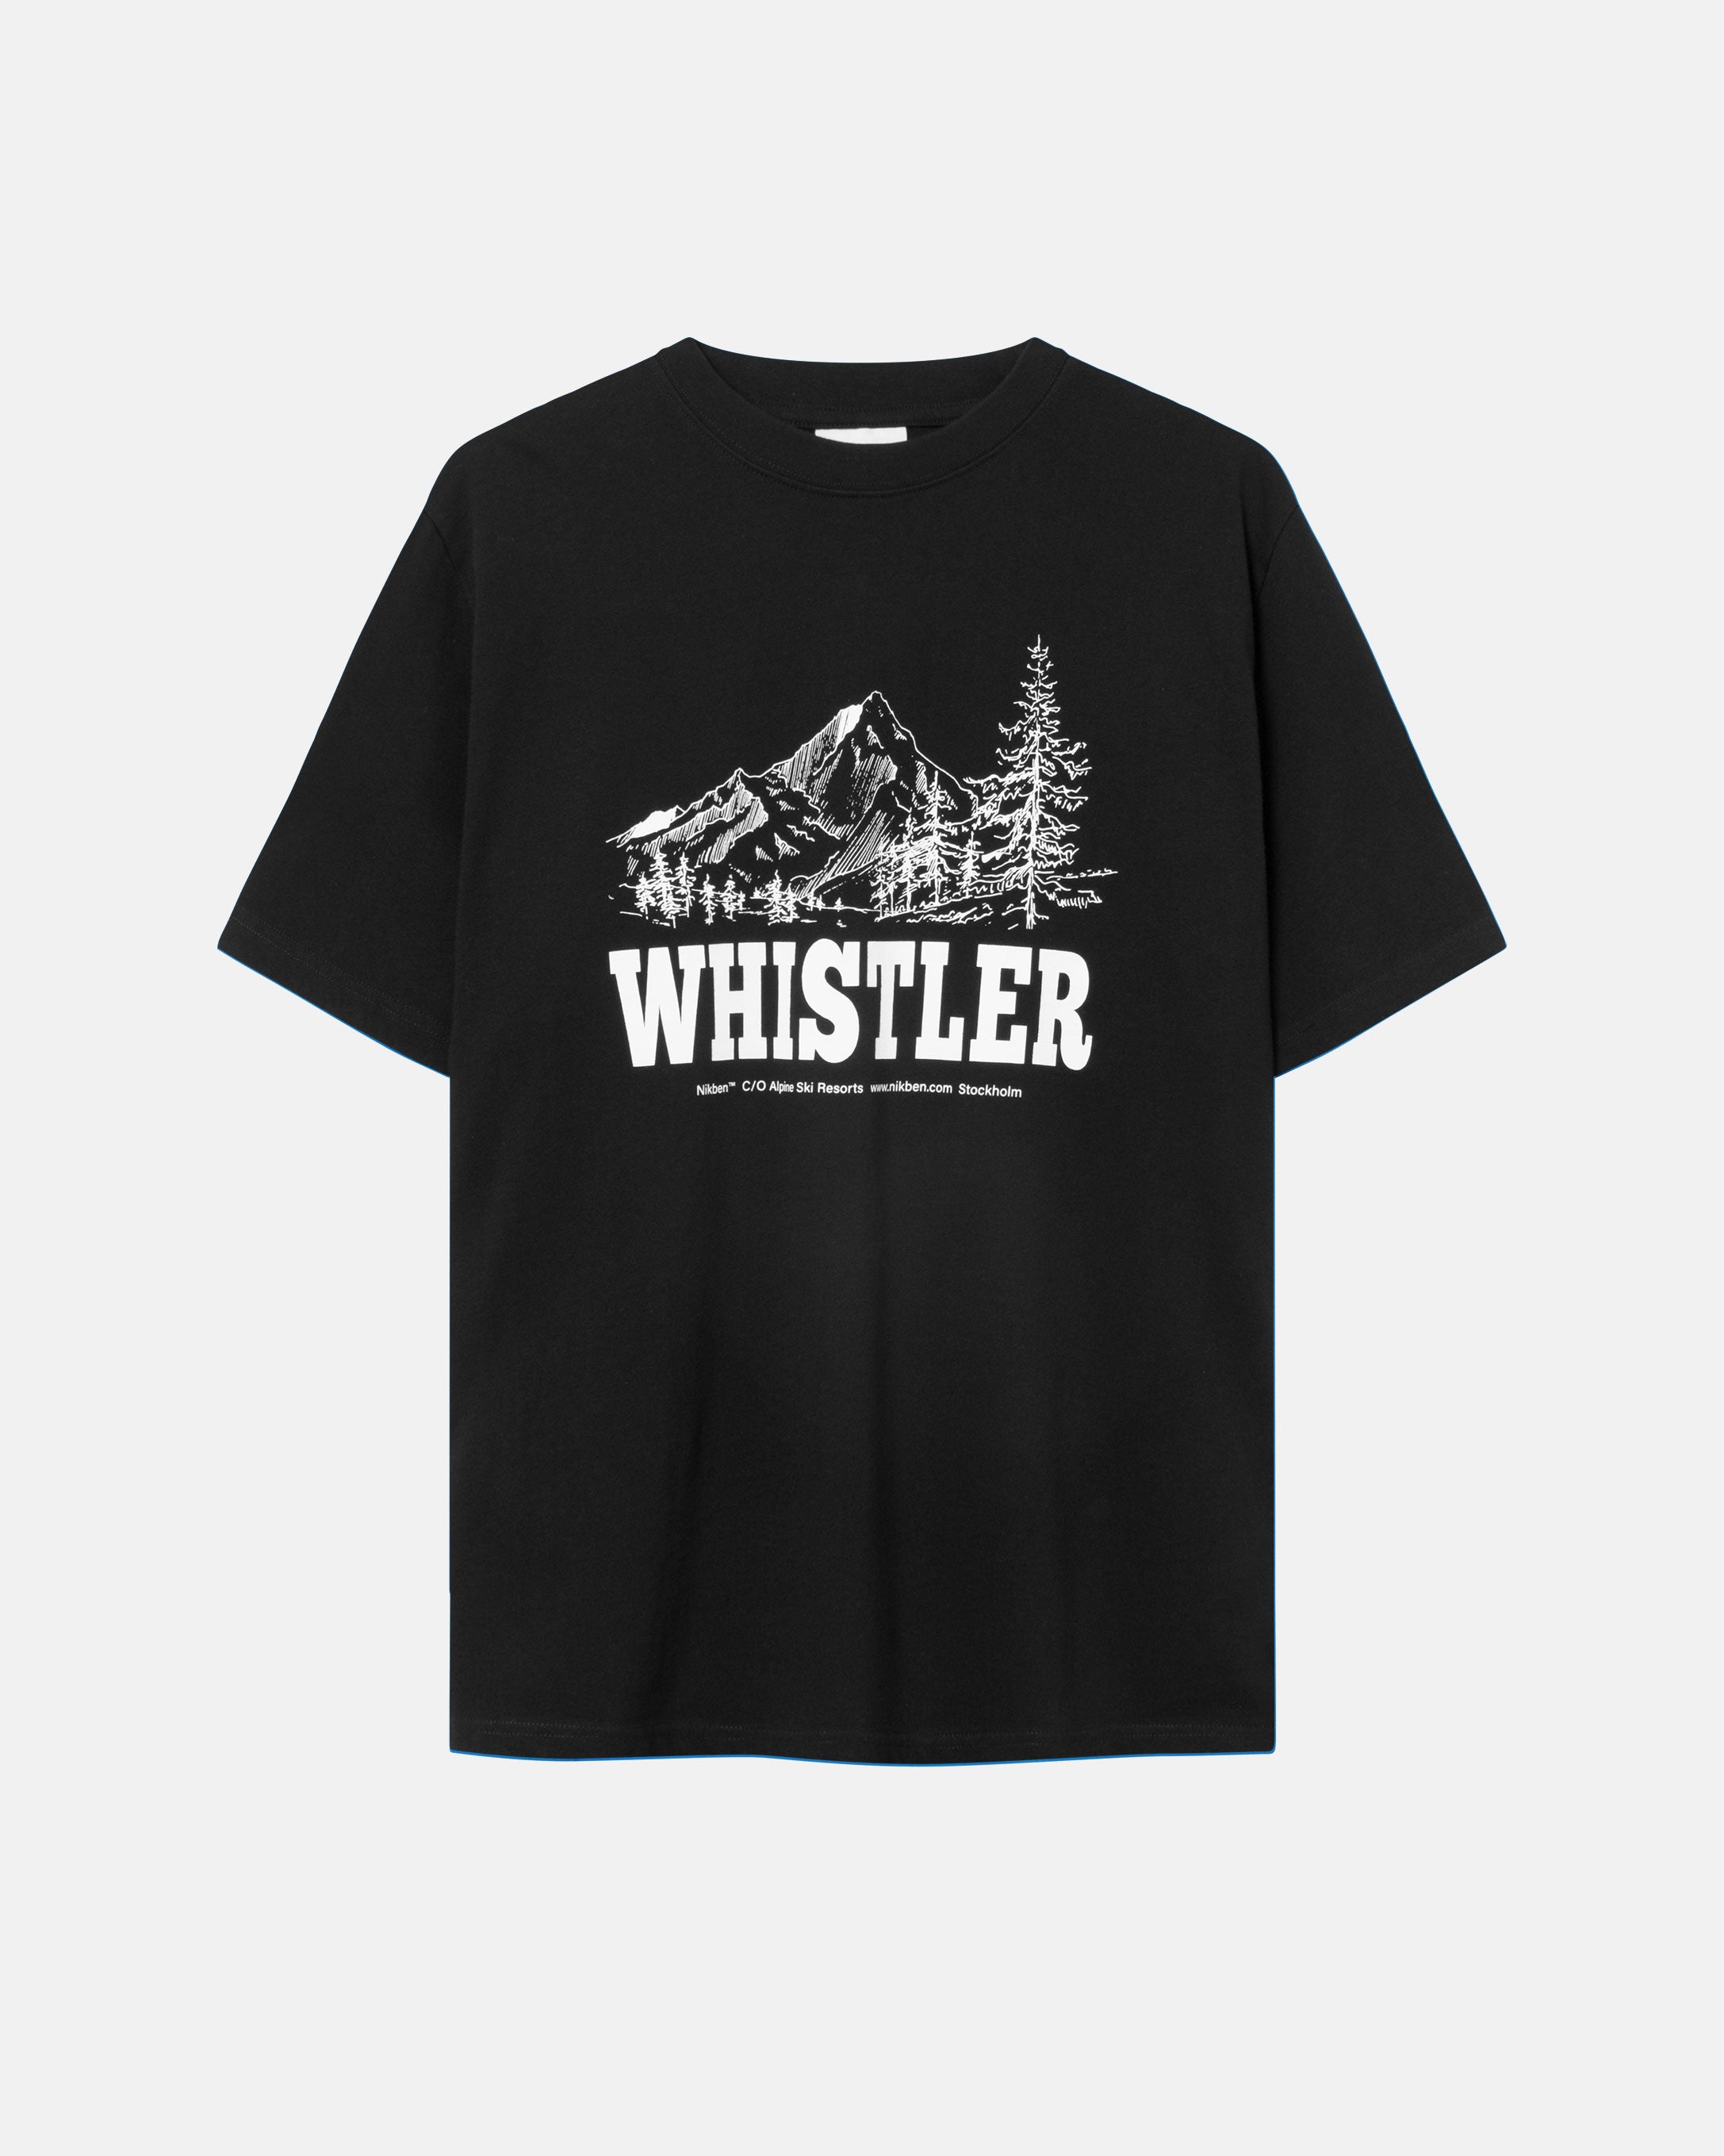 Black t-shirt with white mountain print and 